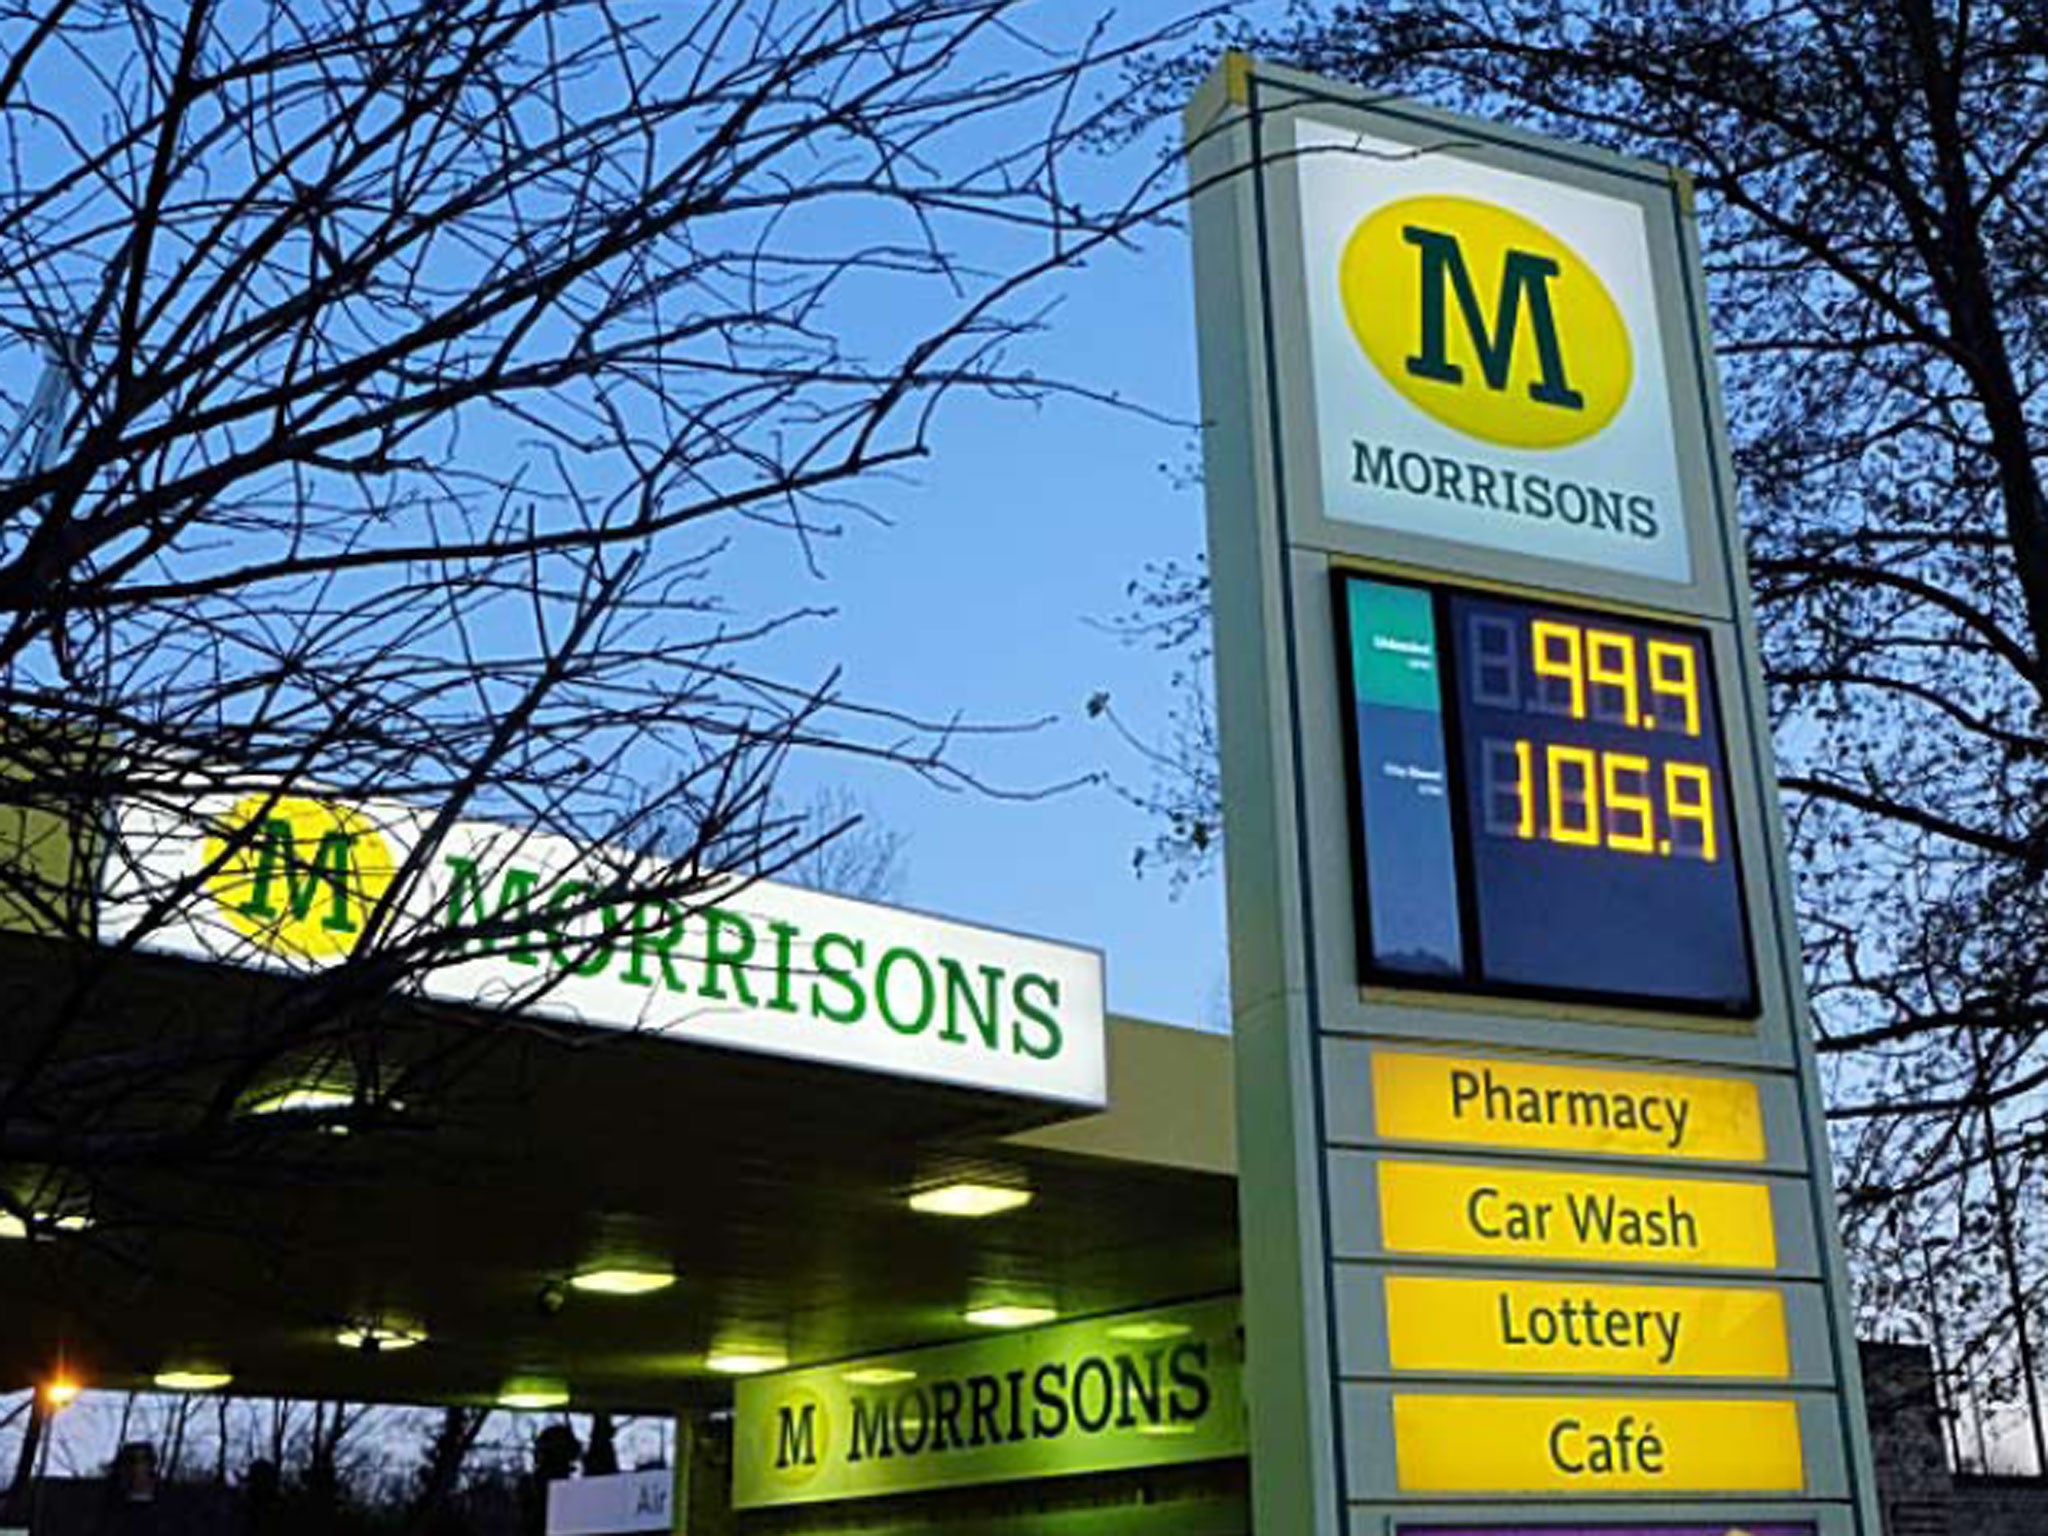 Sales at Morrisons in the three months to the end of January rose 0.1 per cent